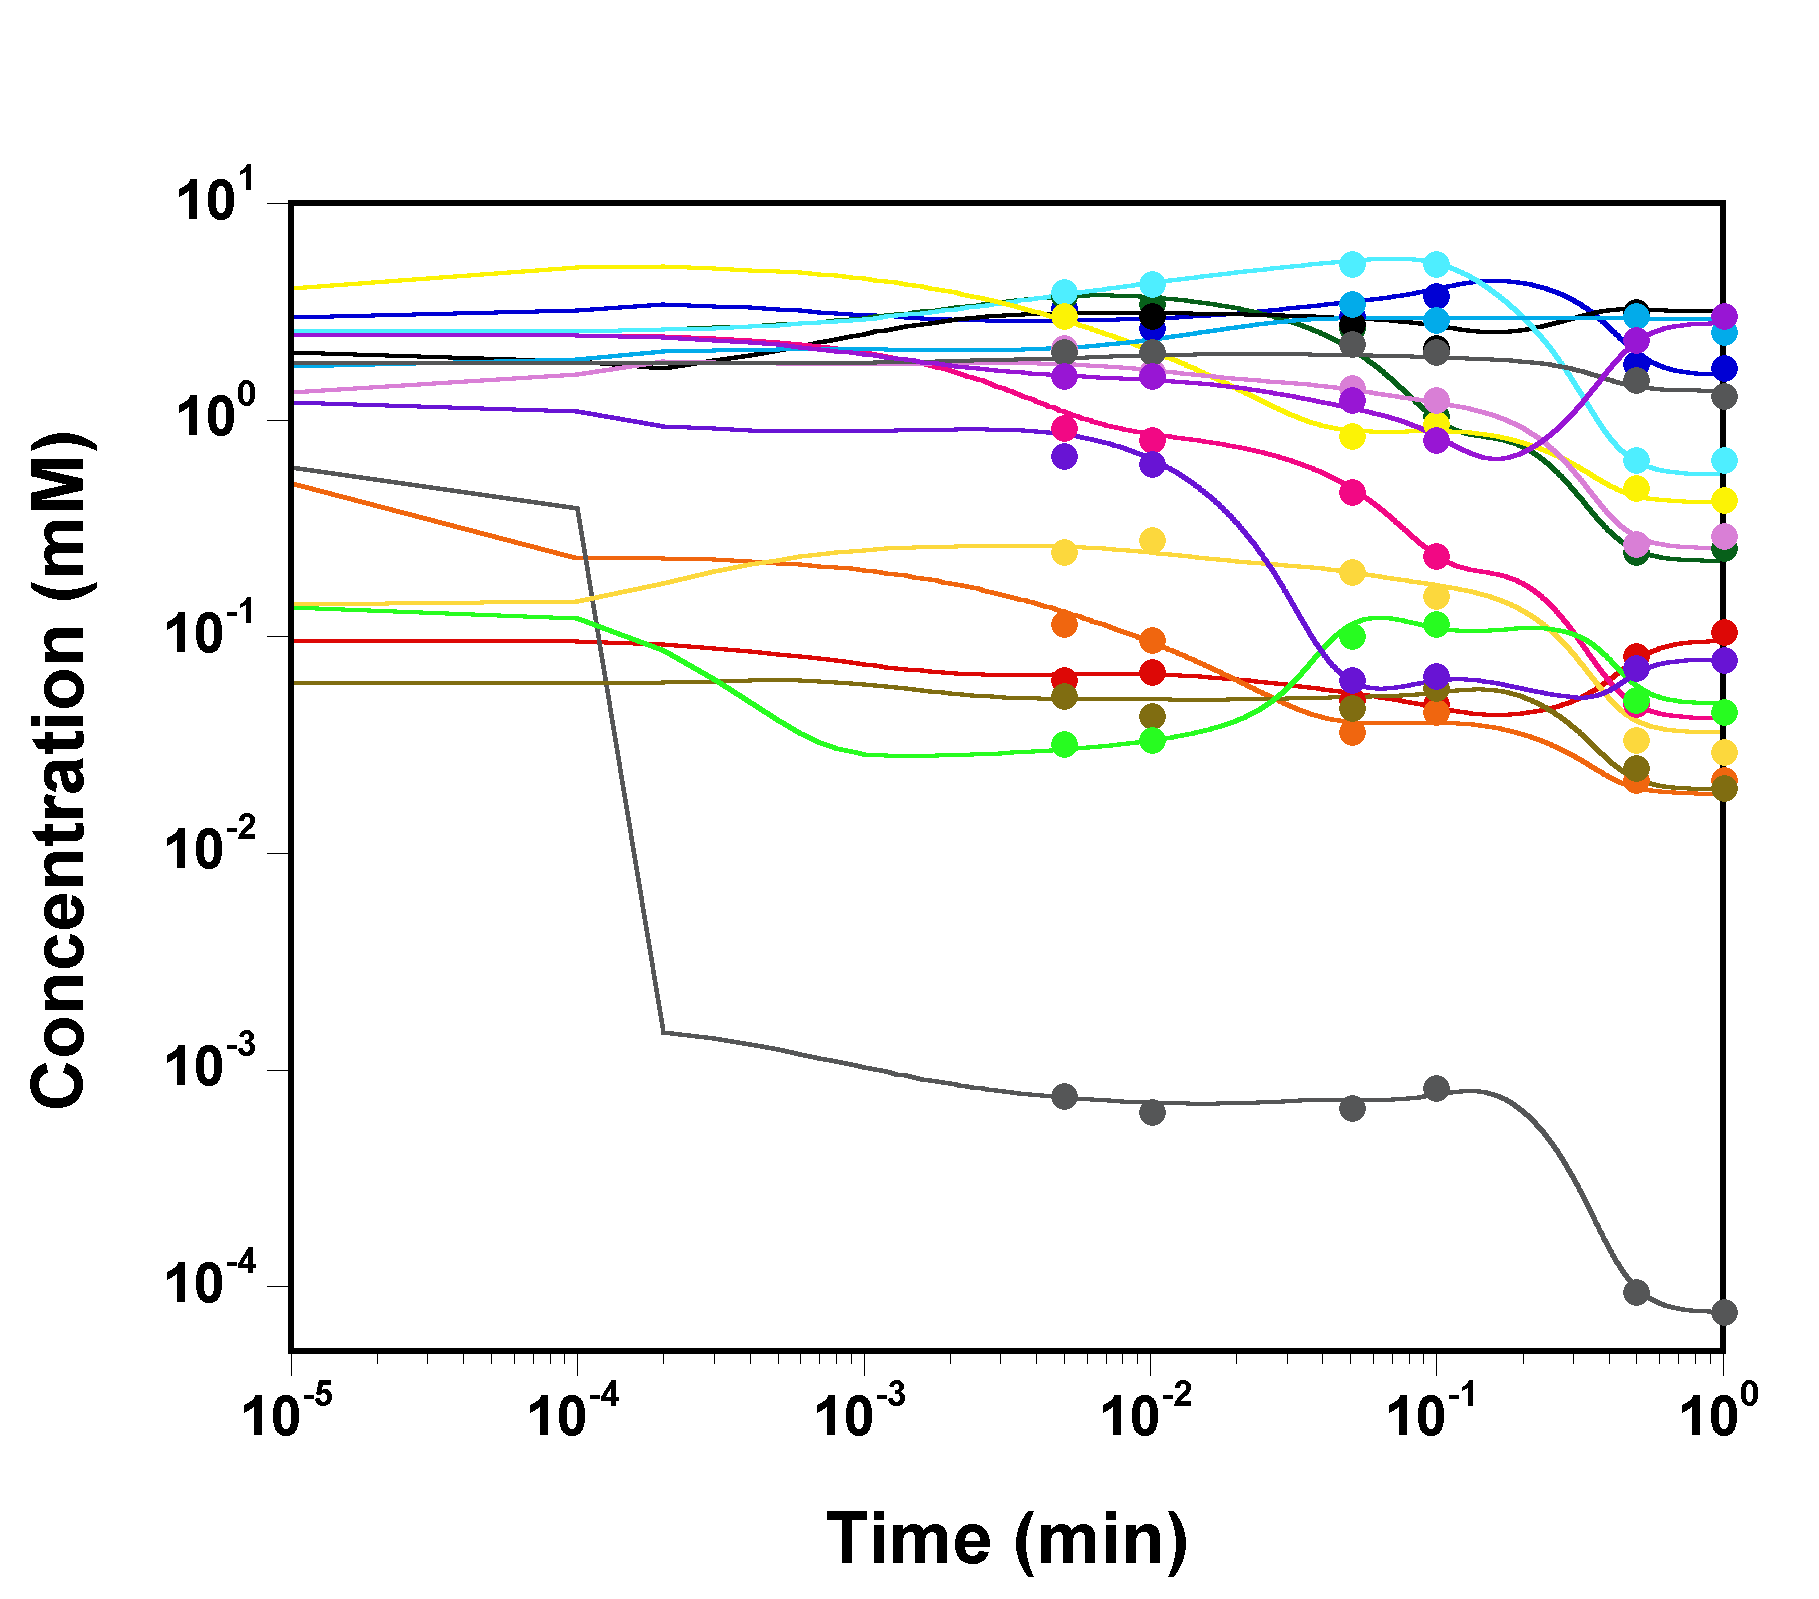 Simulated time course of the model's chemical species